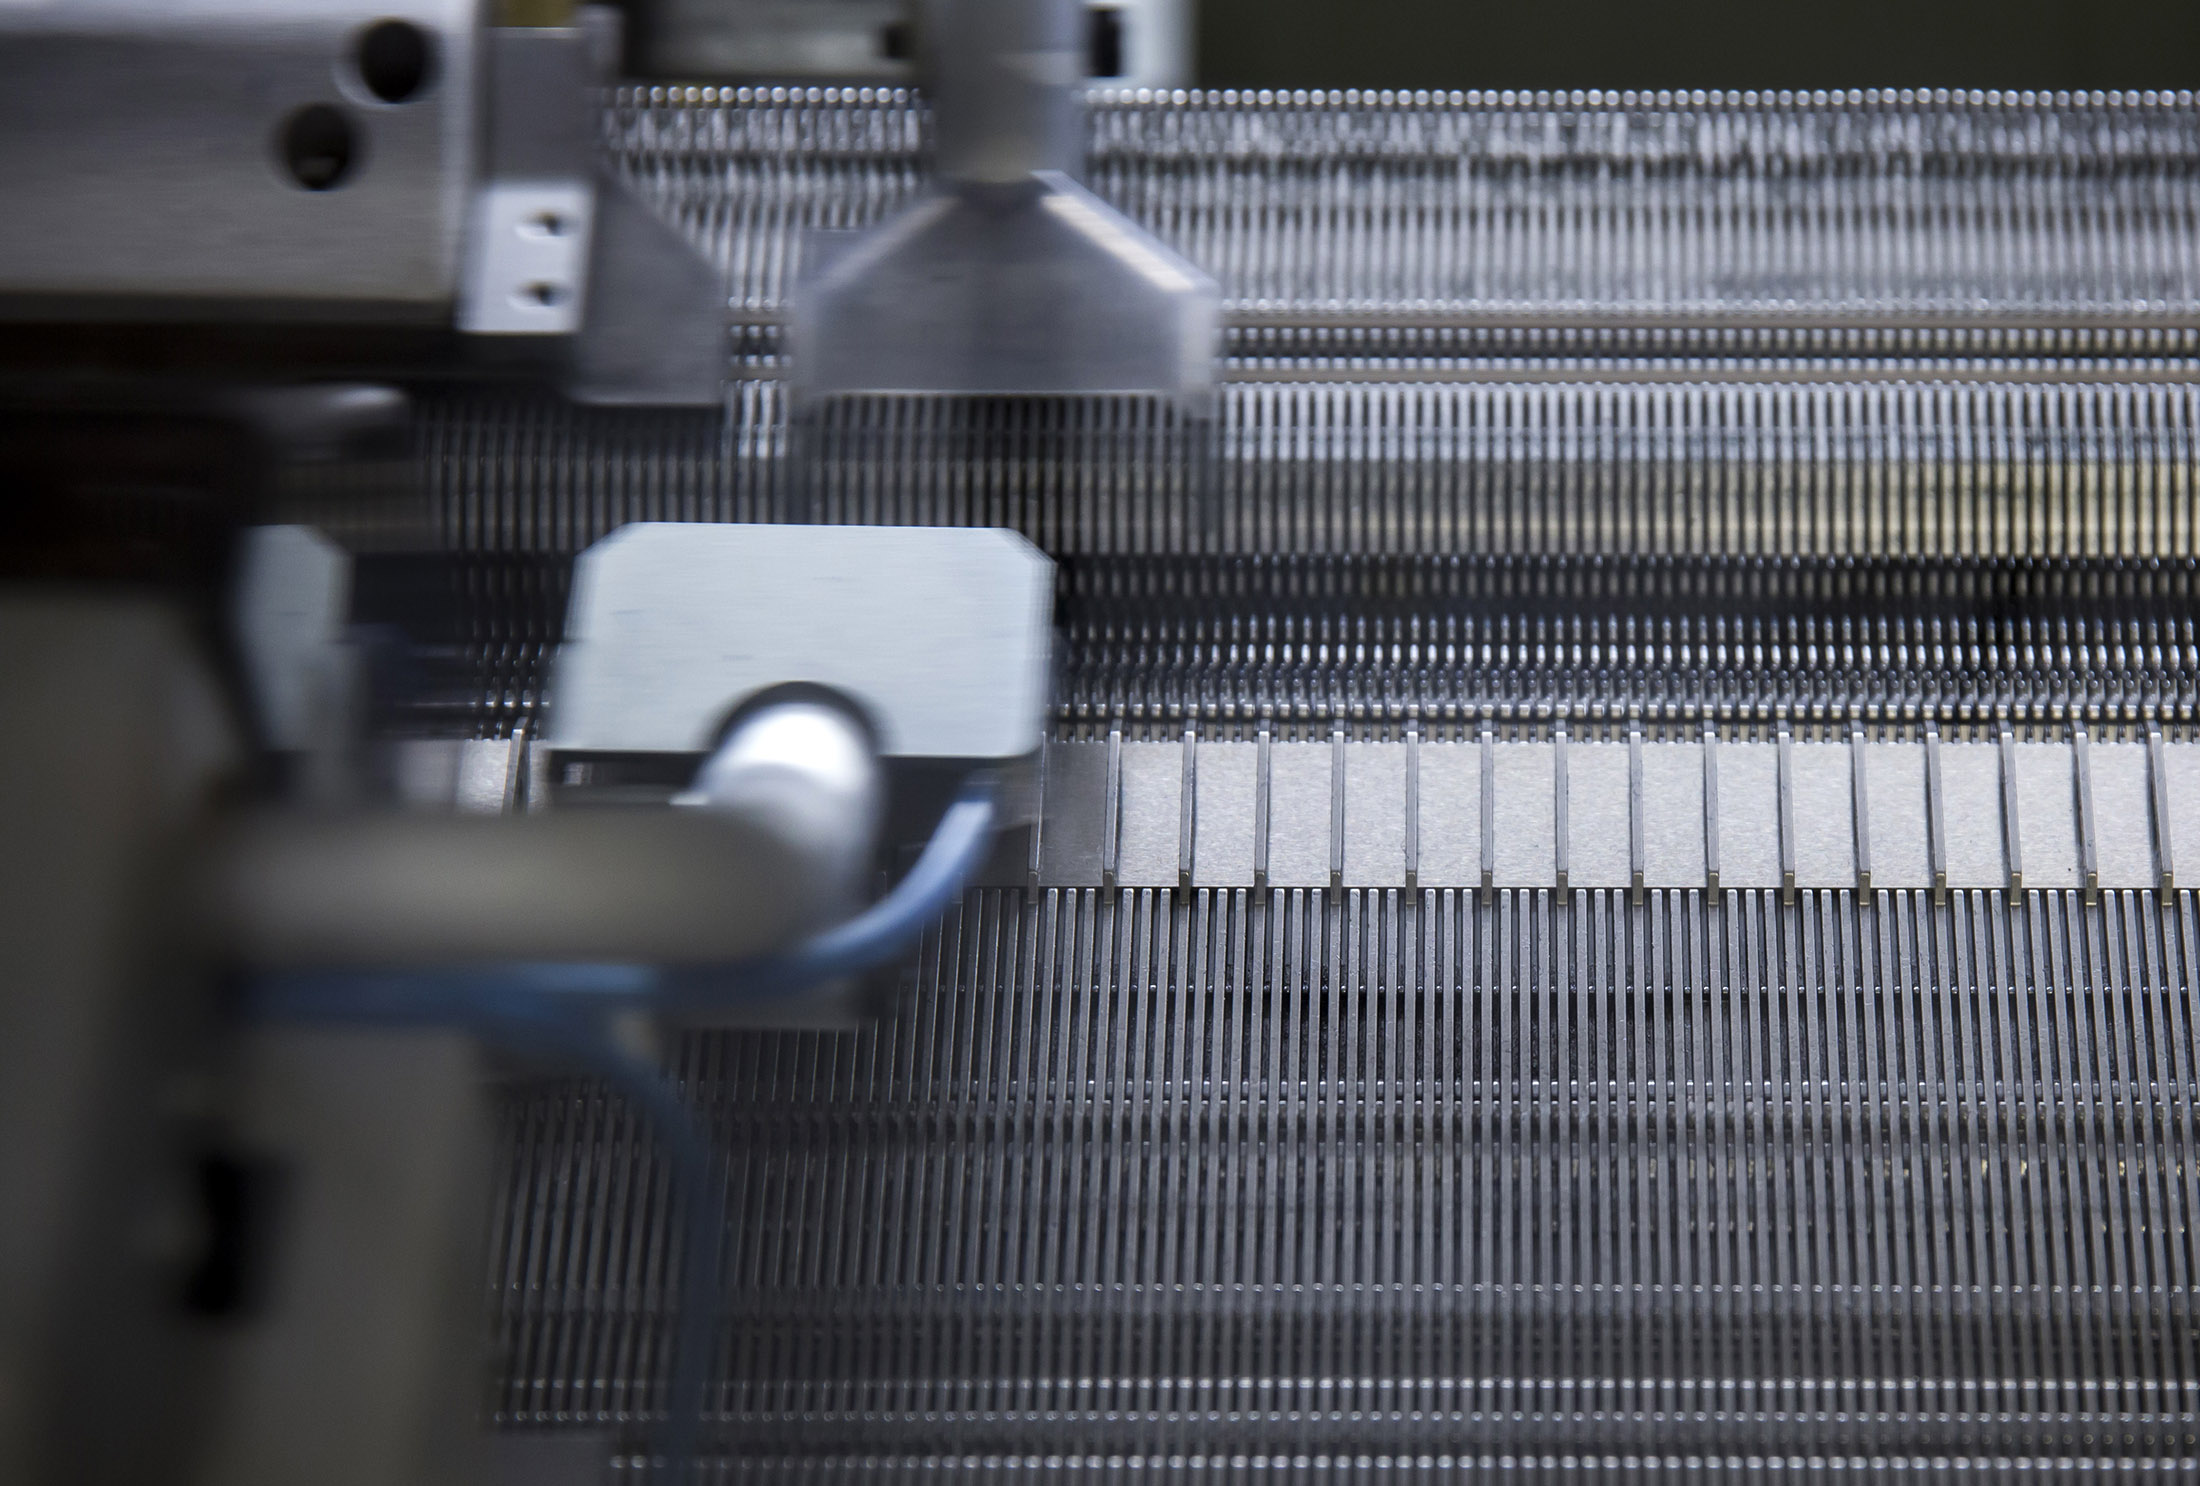 These Hi-Tech Knitting Machines Will Soon Be Making Car Parts